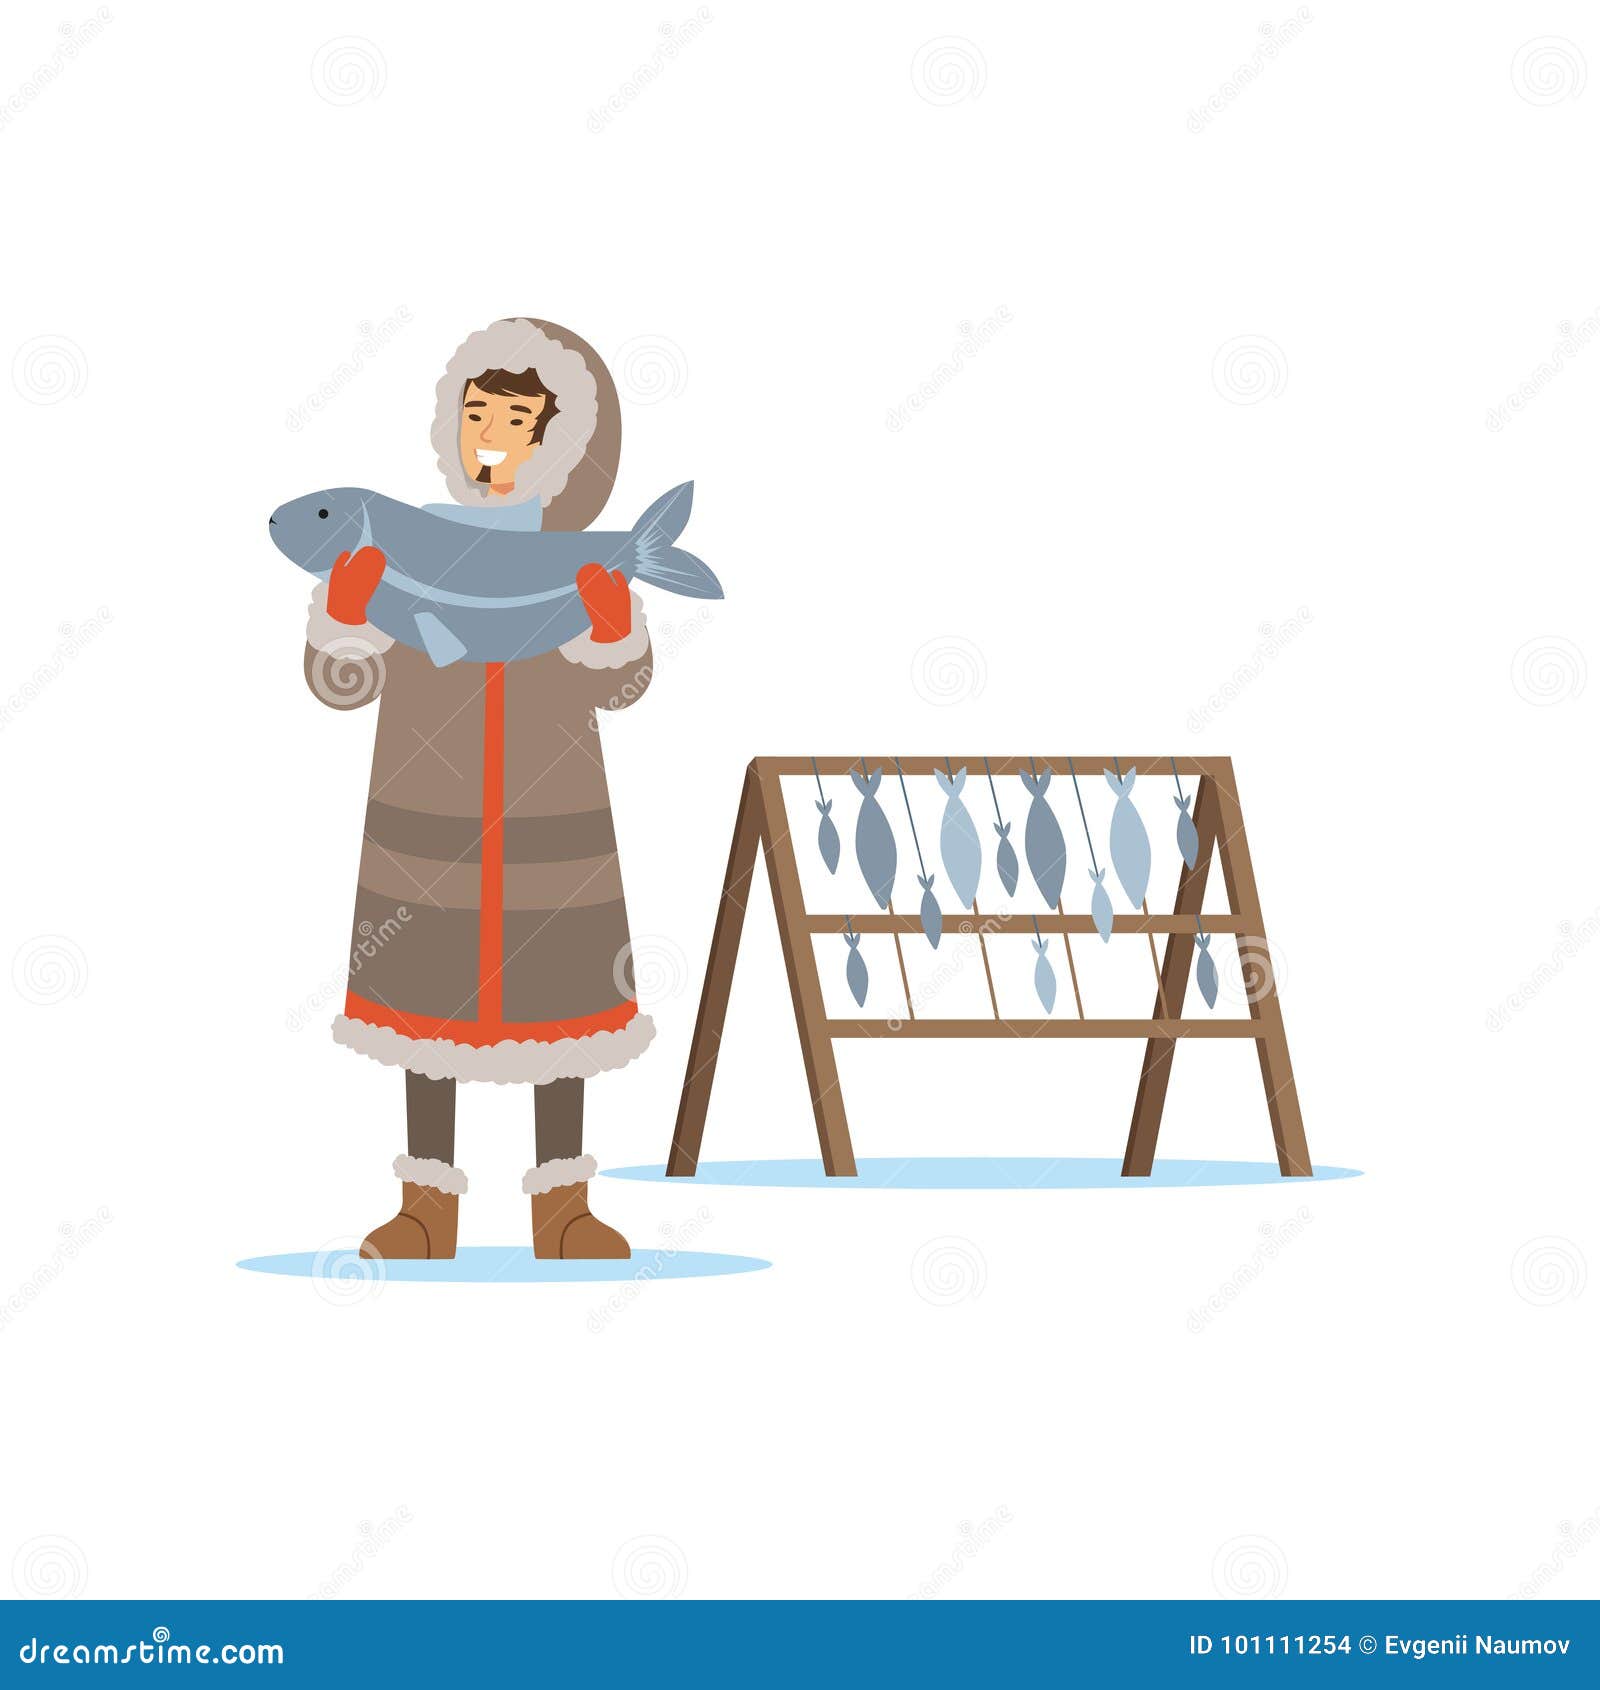 inuit cartoons, illustrations & vector stock images - 913